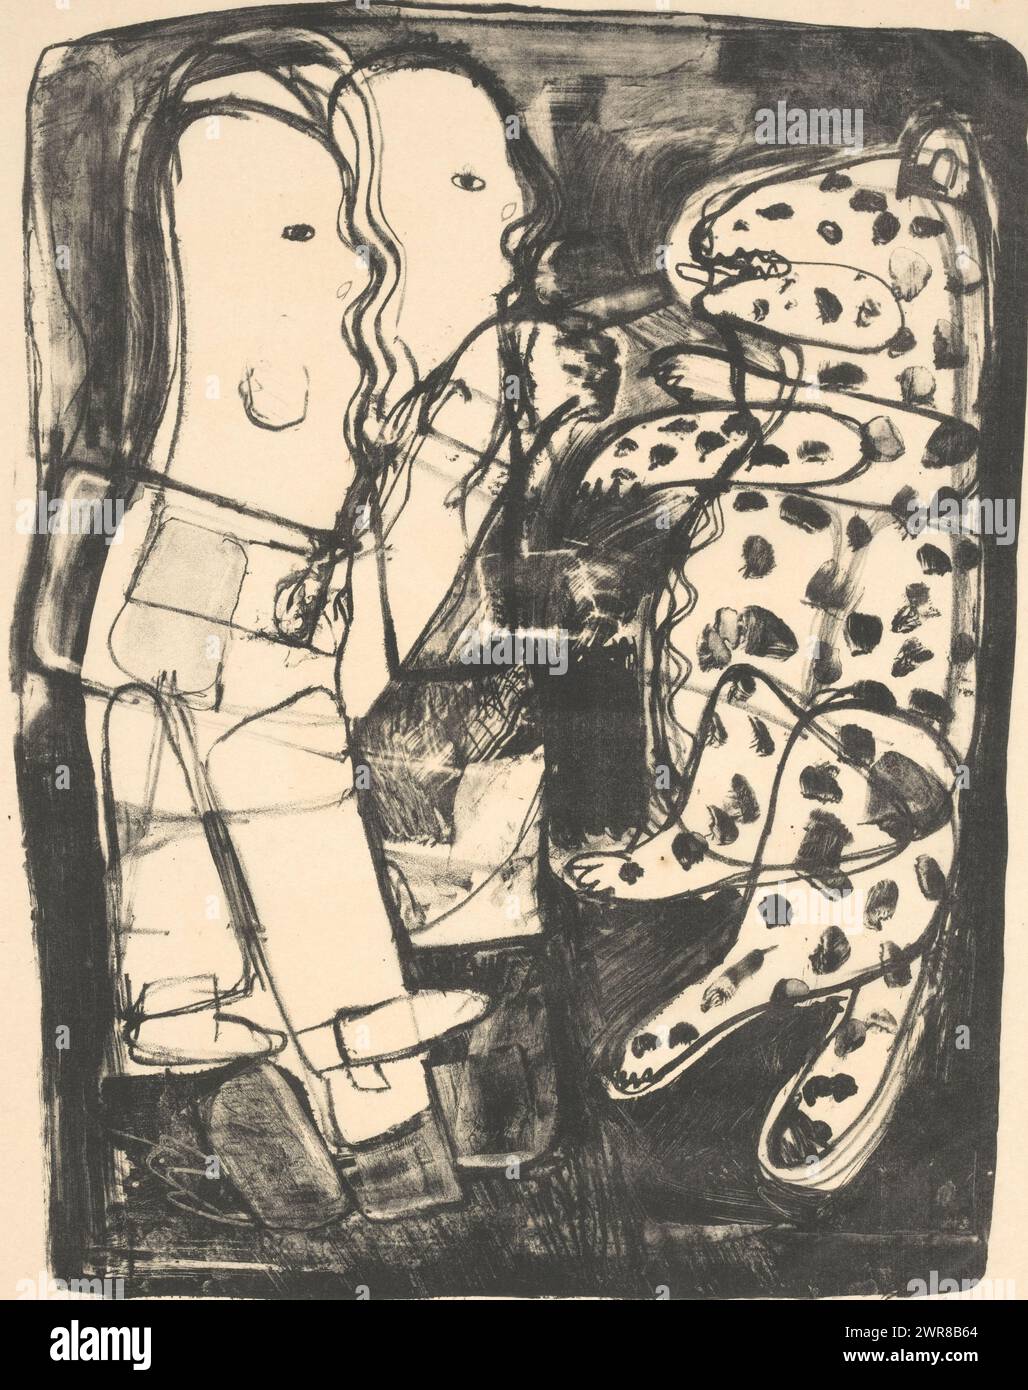 Men with leopard, print maker: Rein Dool, (signed by artist), c. 1970 - c. 1980, paper, height 980 mm × width 640 mm, print Stock Photo